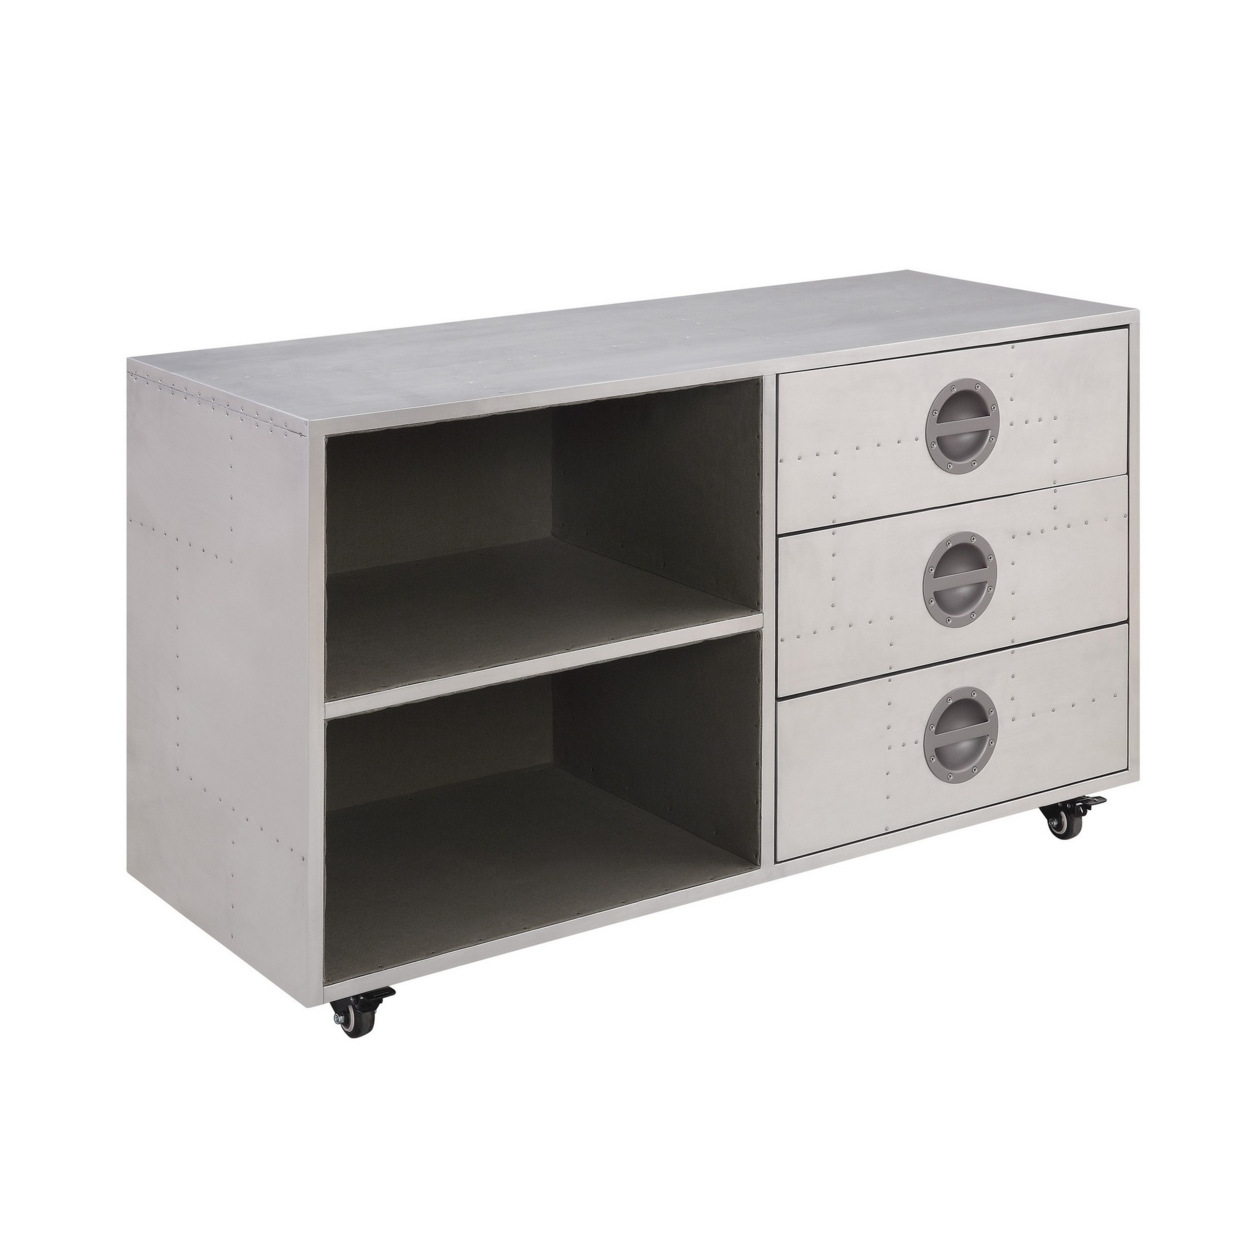 3 Drawer Metal Cabinet With Aluminum Patchwork And 1 Shelf, Silver- Saltoro Sherpi